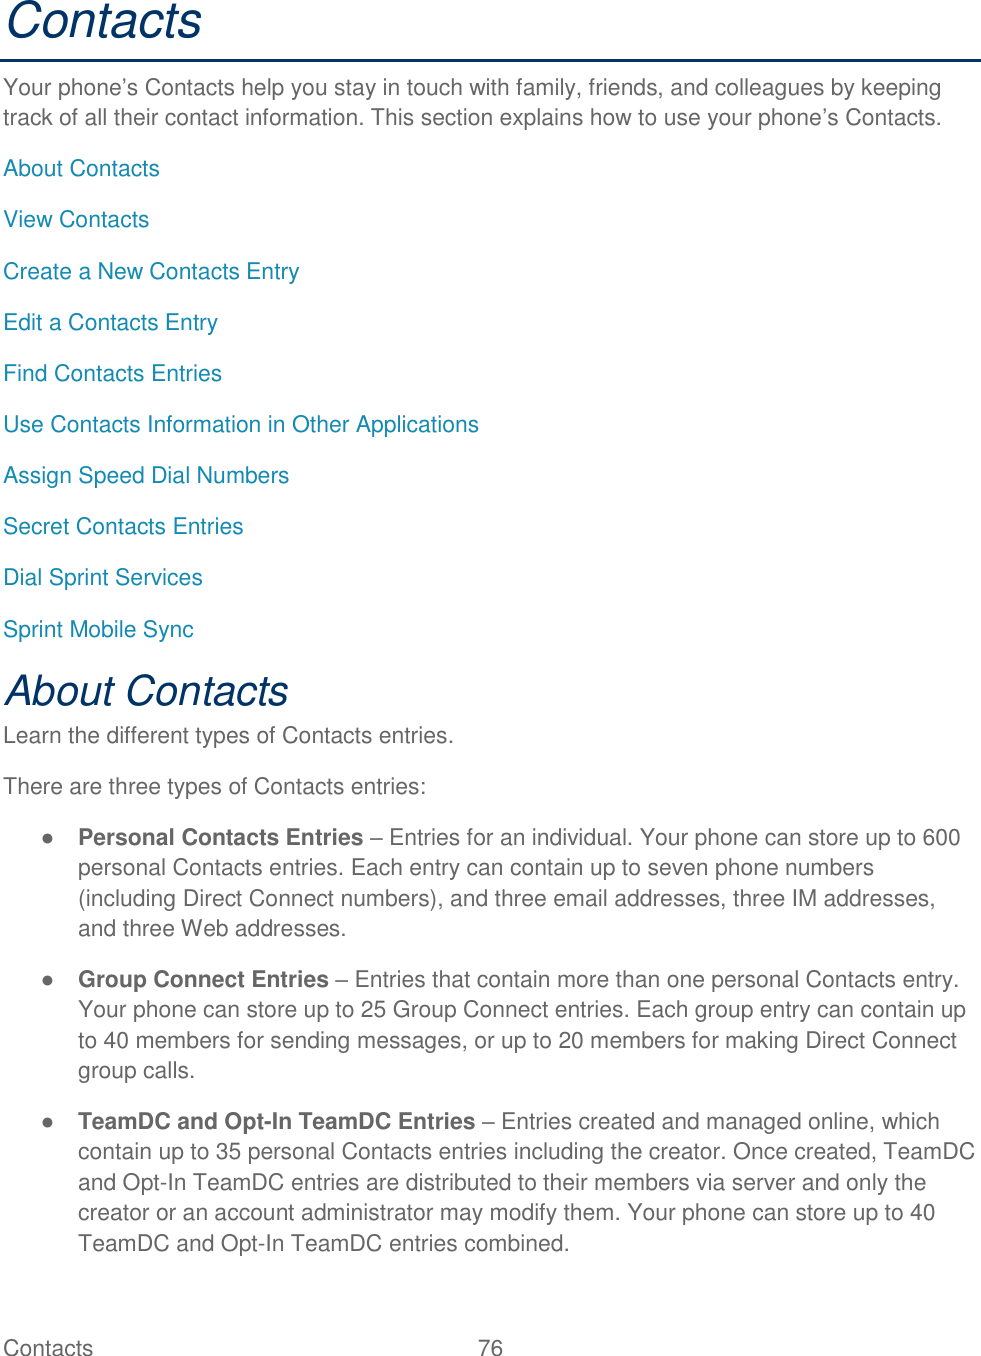  Contacts   76   Contacts Your phone‘s Contacts help you stay in touch with family, friends, and colleagues by keeping track of all their contact information. This section explains how to use your phone‘s Contacts. About Contacts View Contacts Create a New Contacts Entry Edit a Contacts Entry Find Contacts Entries Use Contacts Information in Other Applications Assign Speed Dial Numbers Secret Contacts Entries Dial Sprint Services Sprint Mobile Sync About Contacts Learn the different types of Contacts entries. There are three types of Contacts entries: ● Personal Contacts Entries – Entries for an individual. Your phone can store up to 600 personal Contacts entries. Each entry can contain up to seven phone numbers (including Direct Connect numbers), and three email addresses, three IM addresses, and three Web addresses. ● Group Connect Entries – Entries that contain more than one personal Contacts entry. Your phone can store up to 25 Group Connect entries. Each group entry can contain up to 40 members for sending messages, or up to 20 members for making Direct Connect group calls. ● TeamDC and Opt-In TeamDC Entries – Entries created and managed online, which contain up to 35 personal Contacts entries including the creator. Once created, TeamDC and Opt-In TeamDC entries are distributed to their members via server and only the creator or an account administrator may modify them. Your phone can store up to 40 TeamDC and Opt-In TeamDC entries combined. 